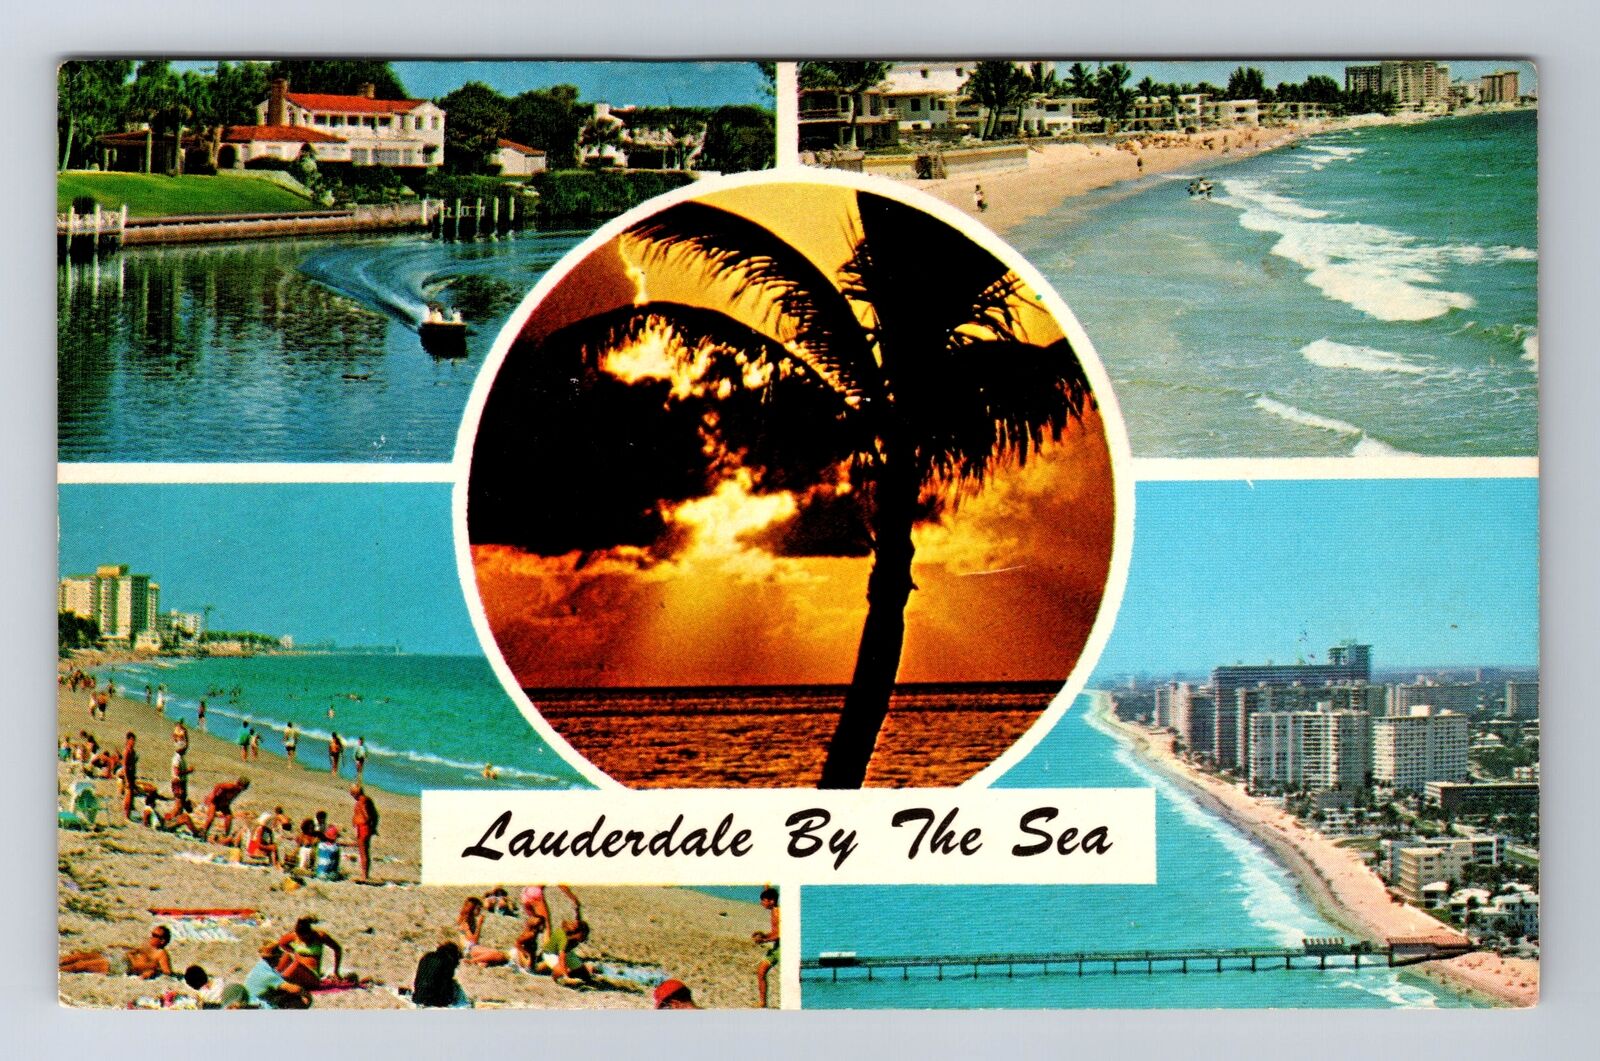 Lauderdale By The Sea FL-Florida, Scenic View Of Beach Area, Vintage Postcard